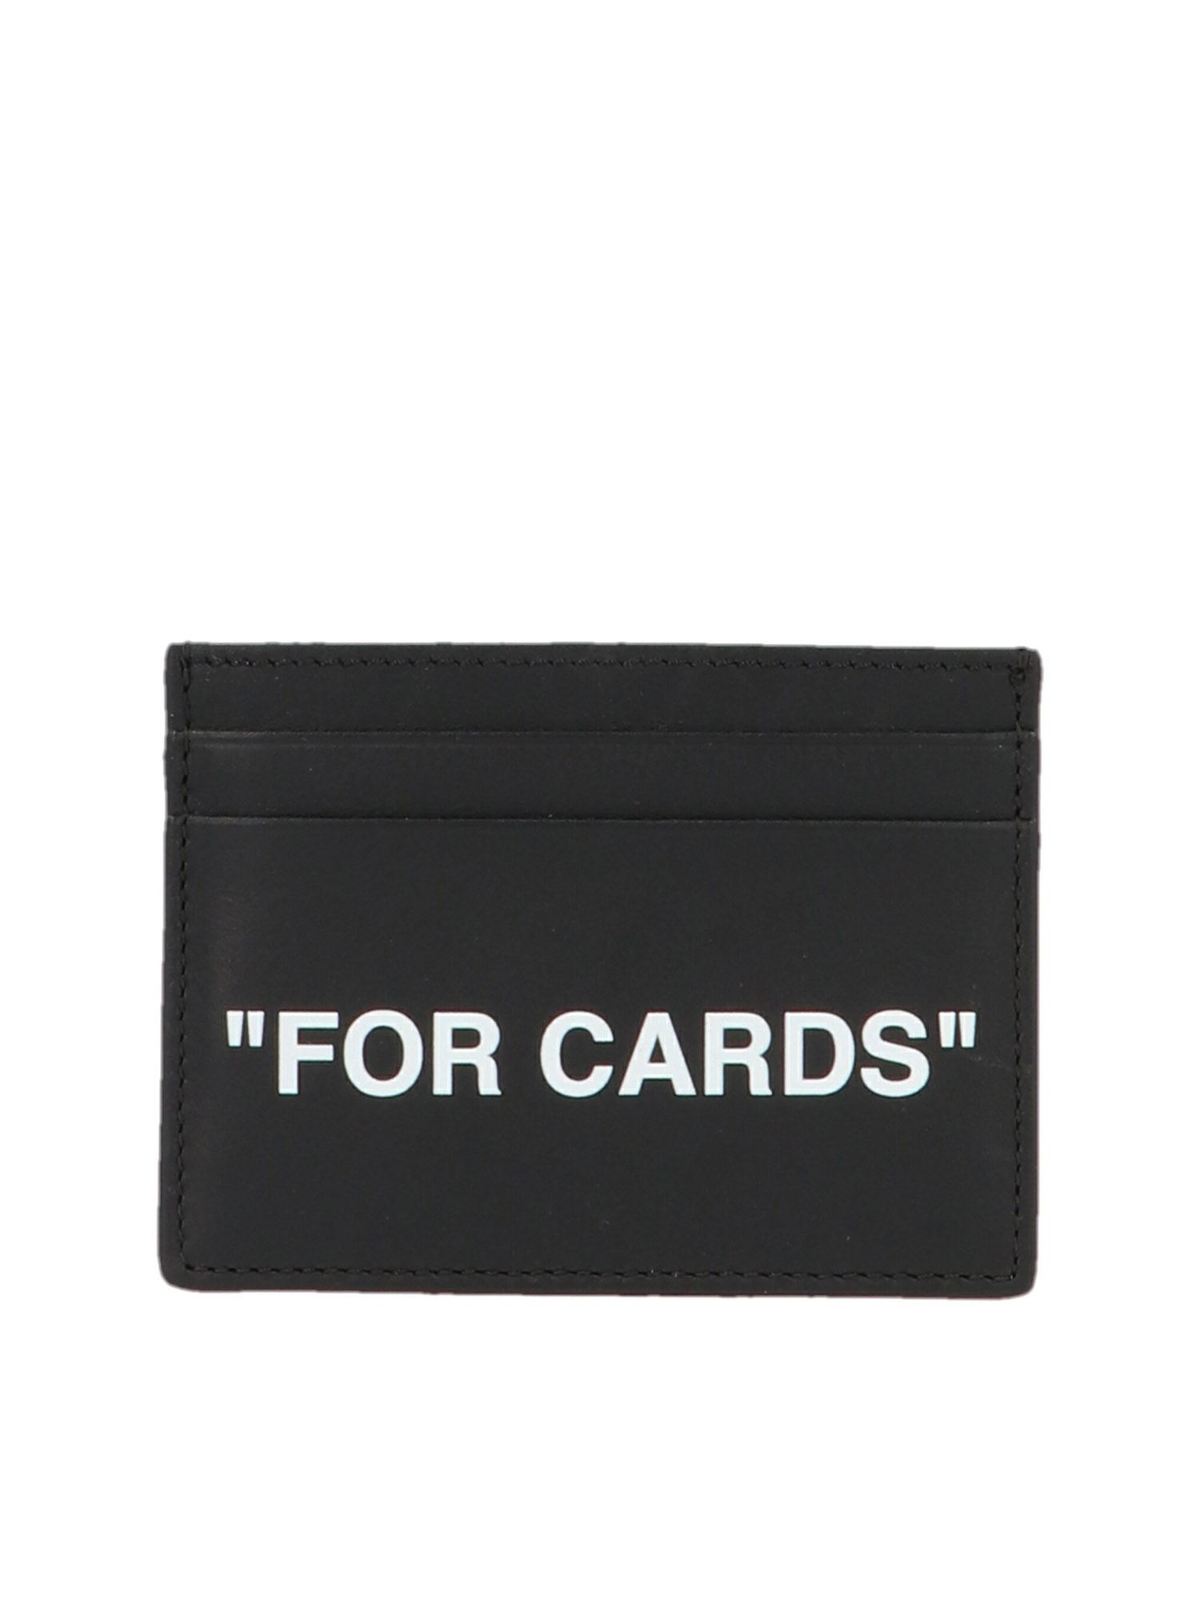 OFF-WHITE FOR CARDS CARD HOLDER IN BLACK